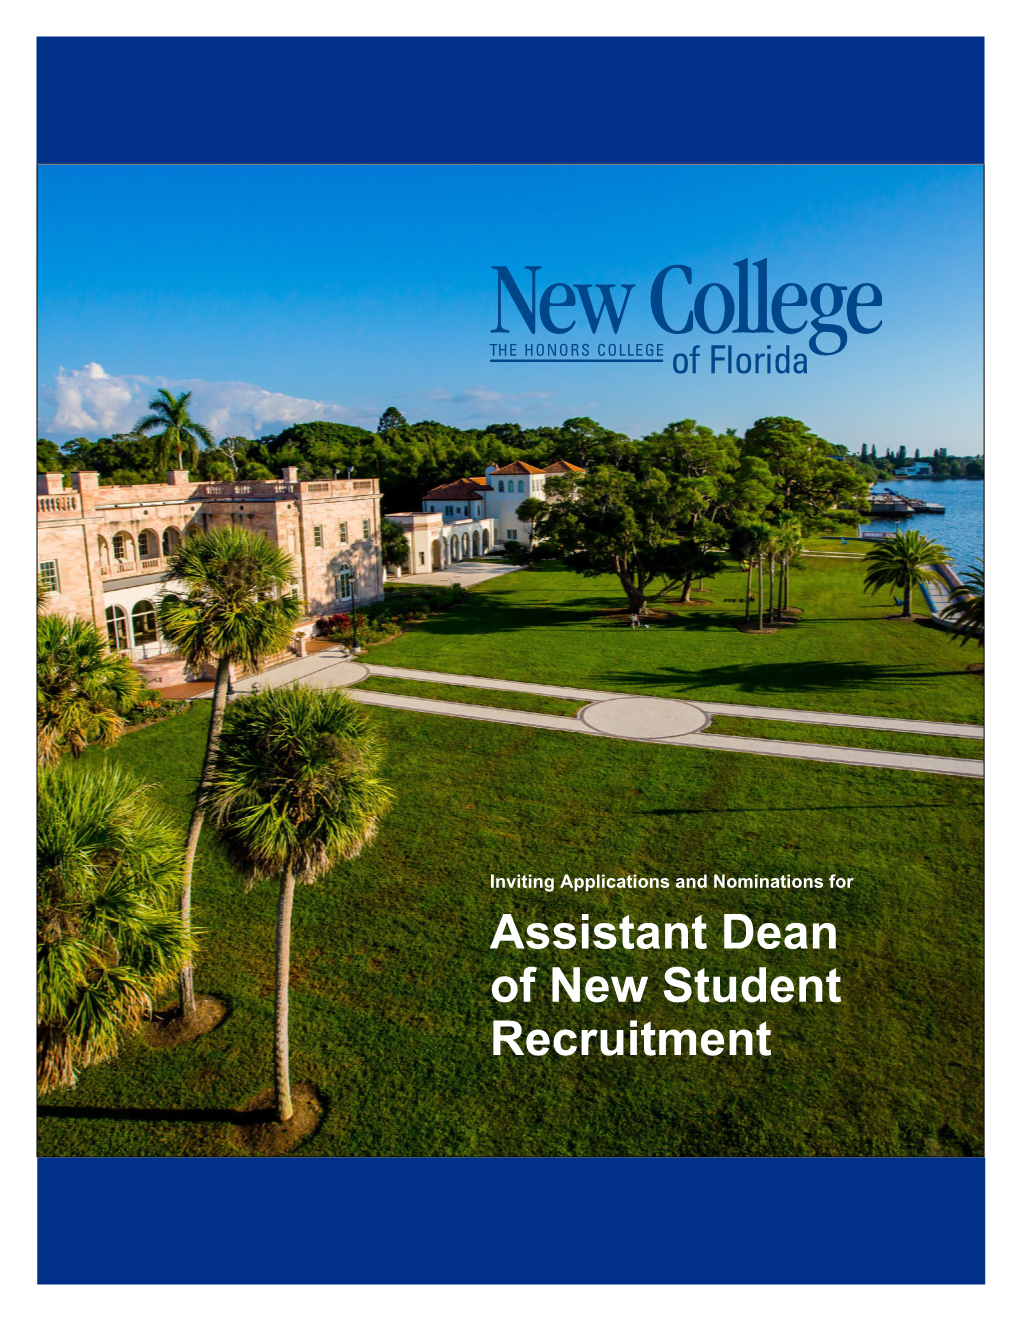 Assistant Dean of New Student Recruitment Assistant Dean of New Student Recruitment Executive Search